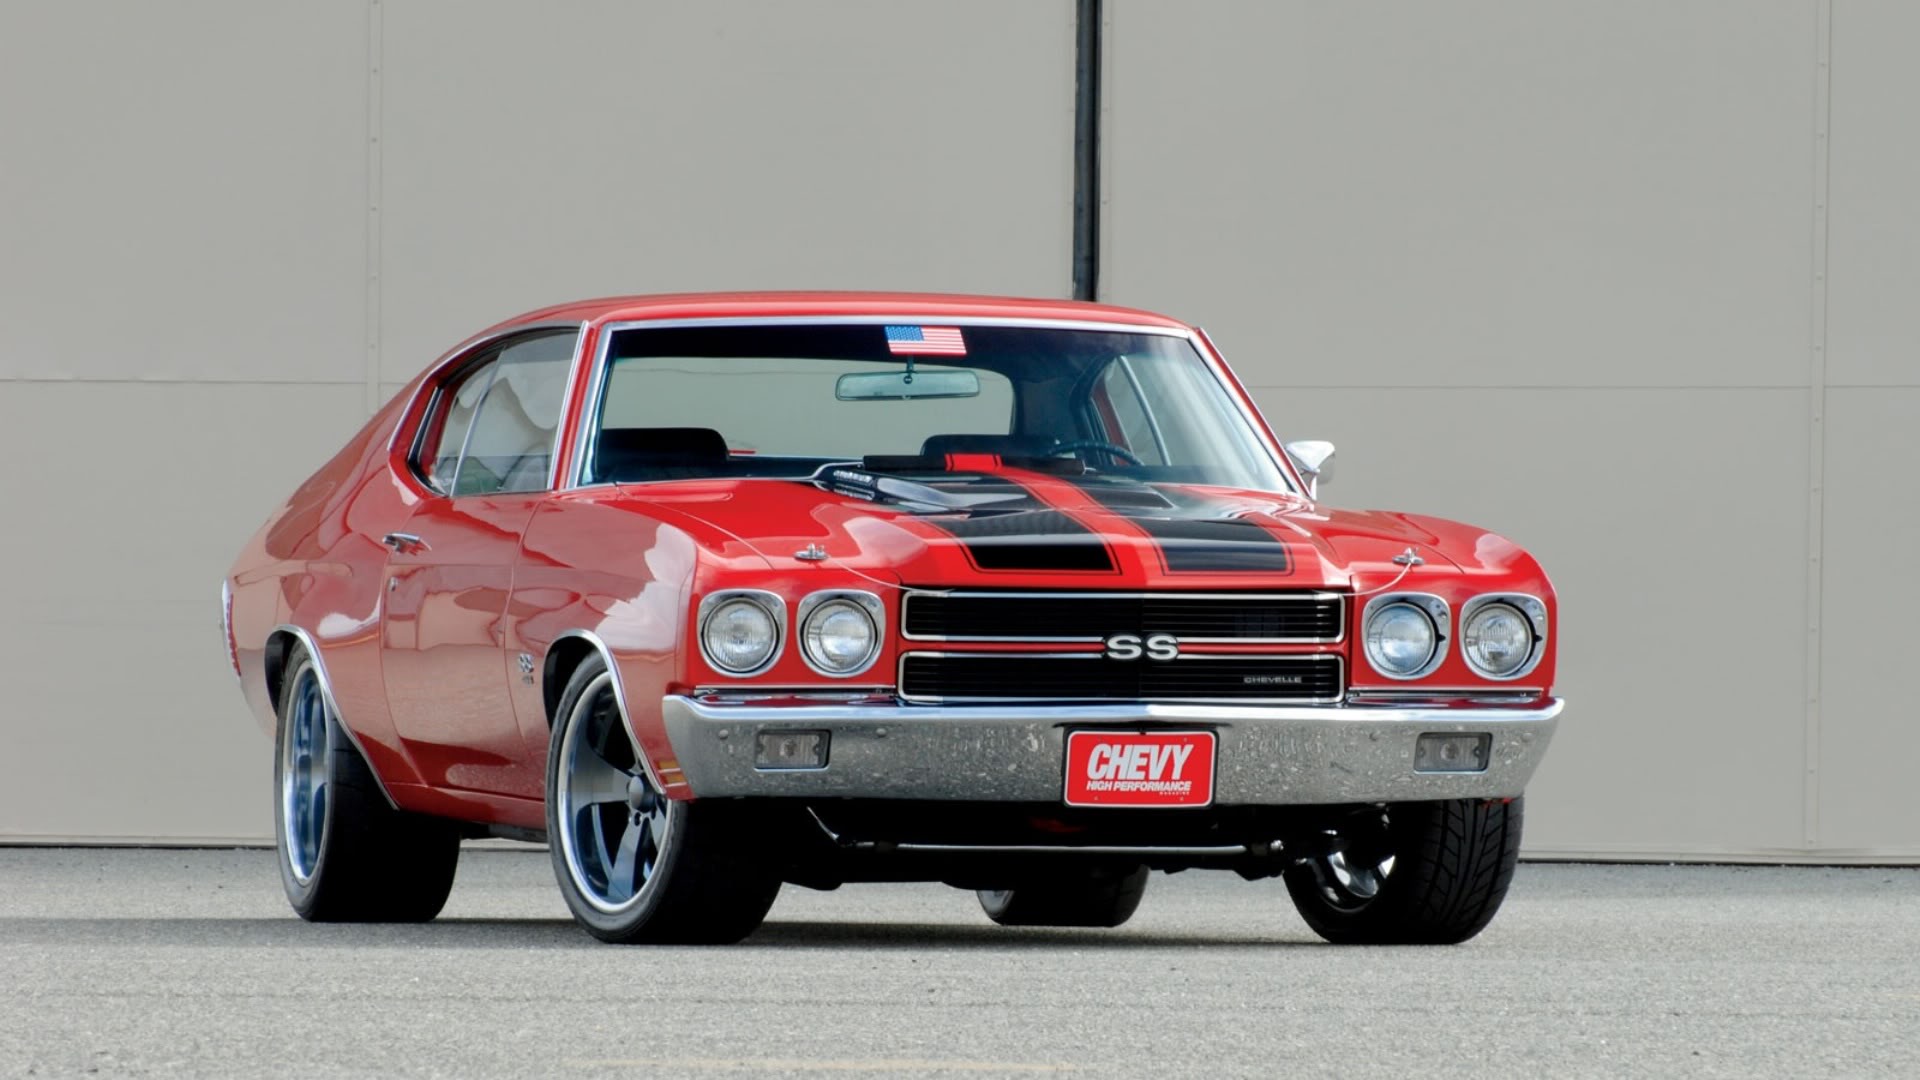 1970 Red Chevy Chevelle SS 454 wallpaper background 1920x1080